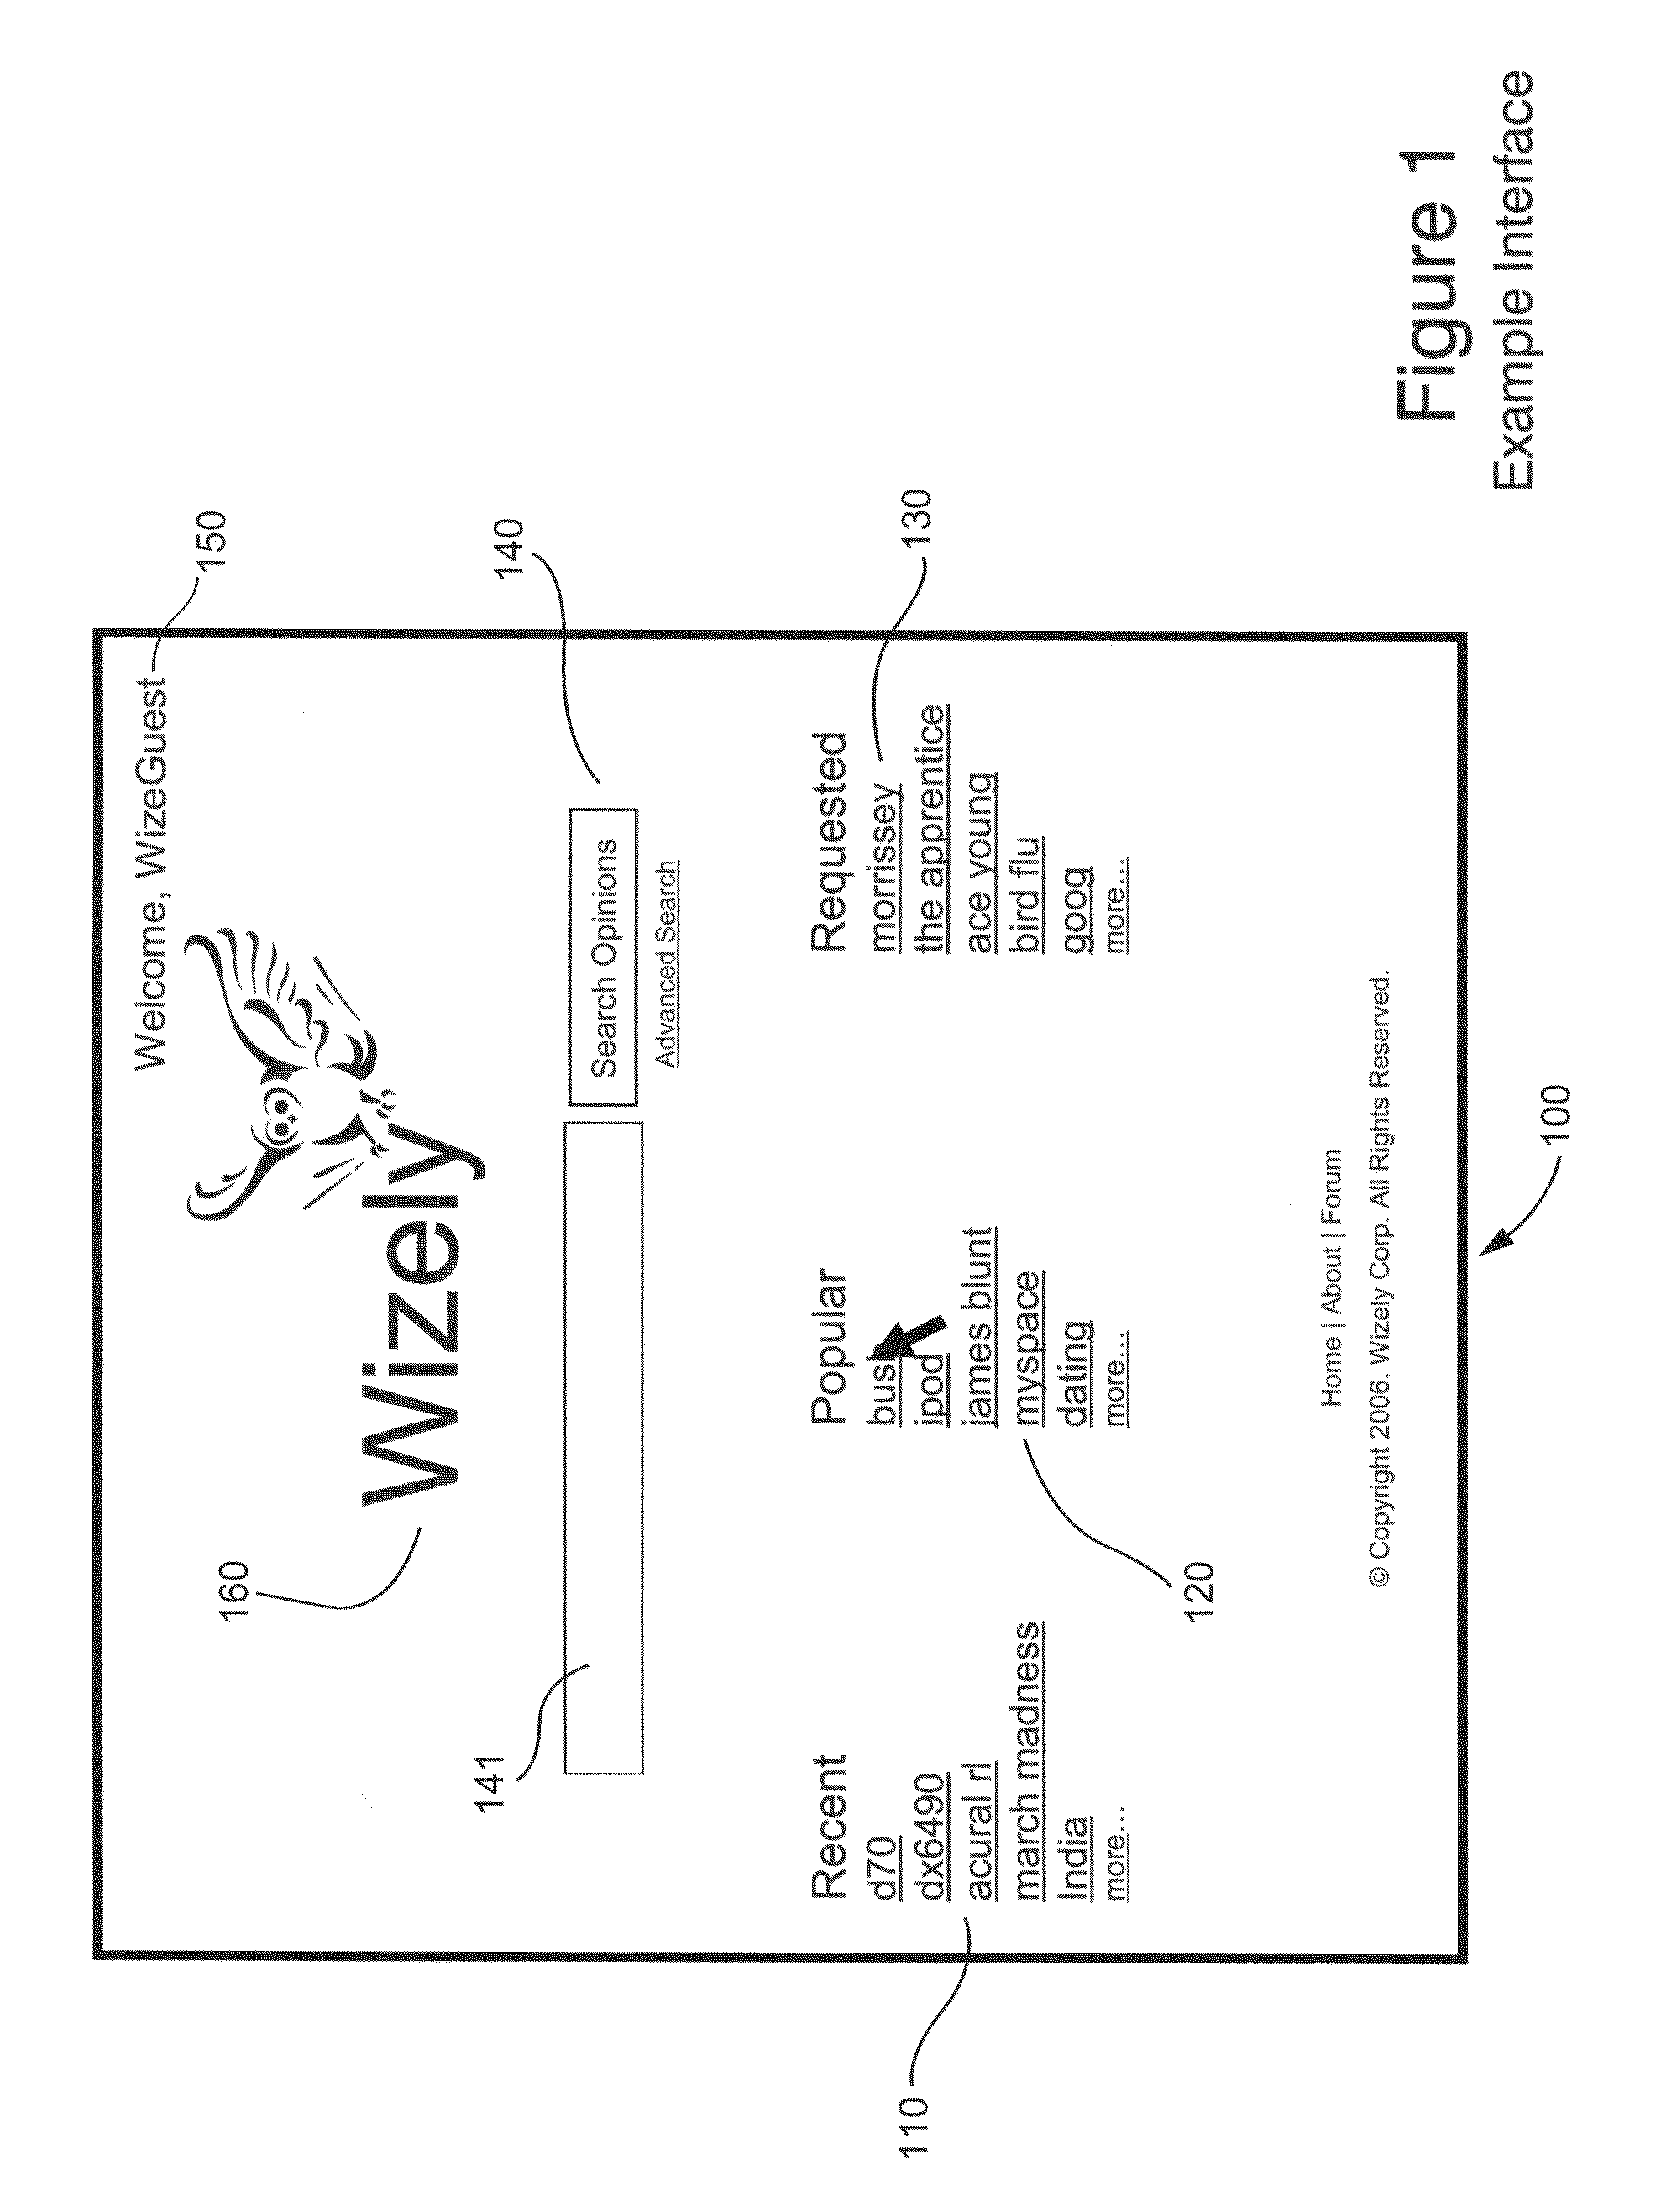 System and method for evaluating sentiment